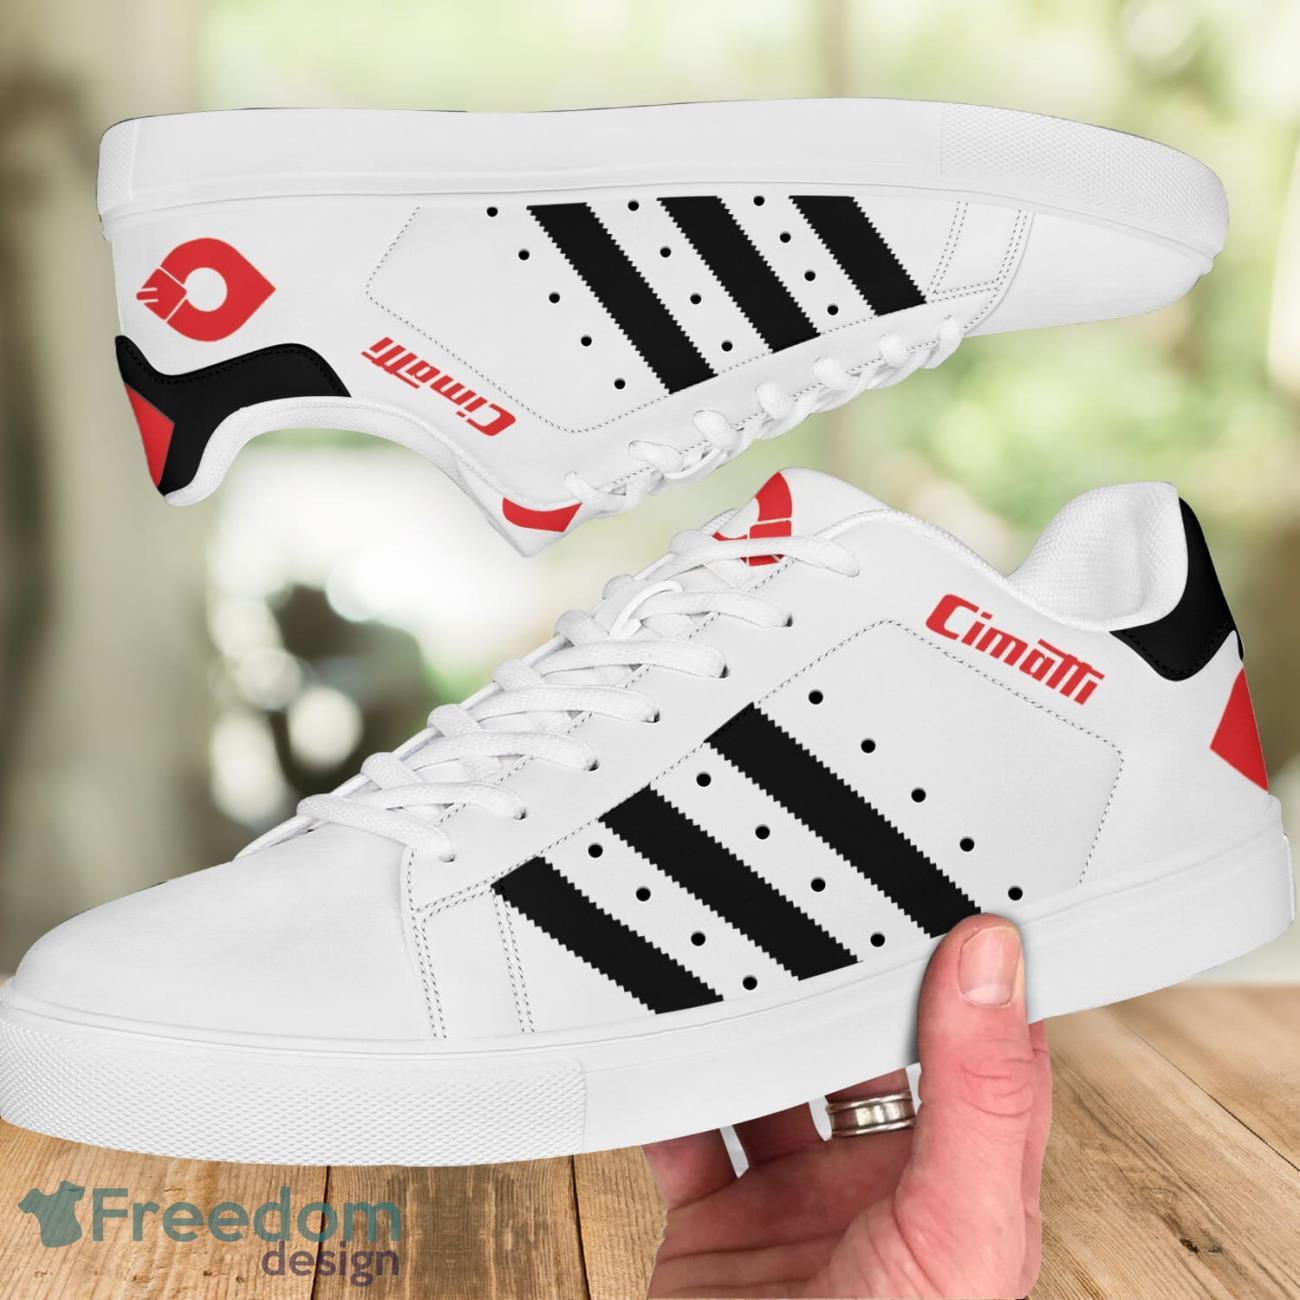 Cimatti Low Top Skate Shoes For Men And Women Fans Gift Shoes Product Photo 2